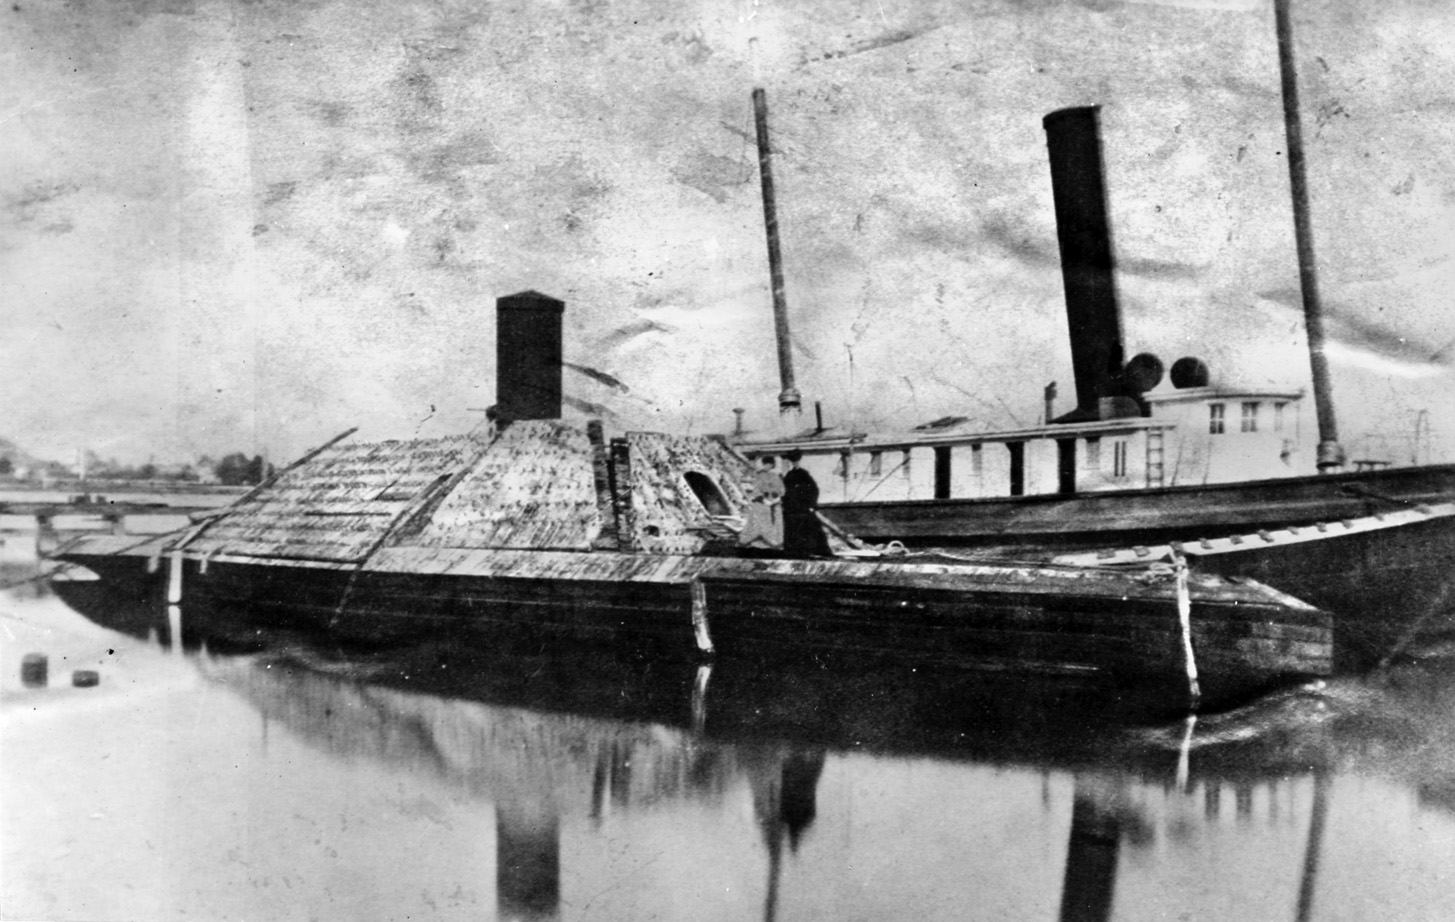 The salvaged Albemarle at Norfolk Navy Yard in 1865. The gunboat, which featured an octagonal casemate covered in two layers of armor plate, was armed with two Brooke rifled guns and an 18-foot bow ram.